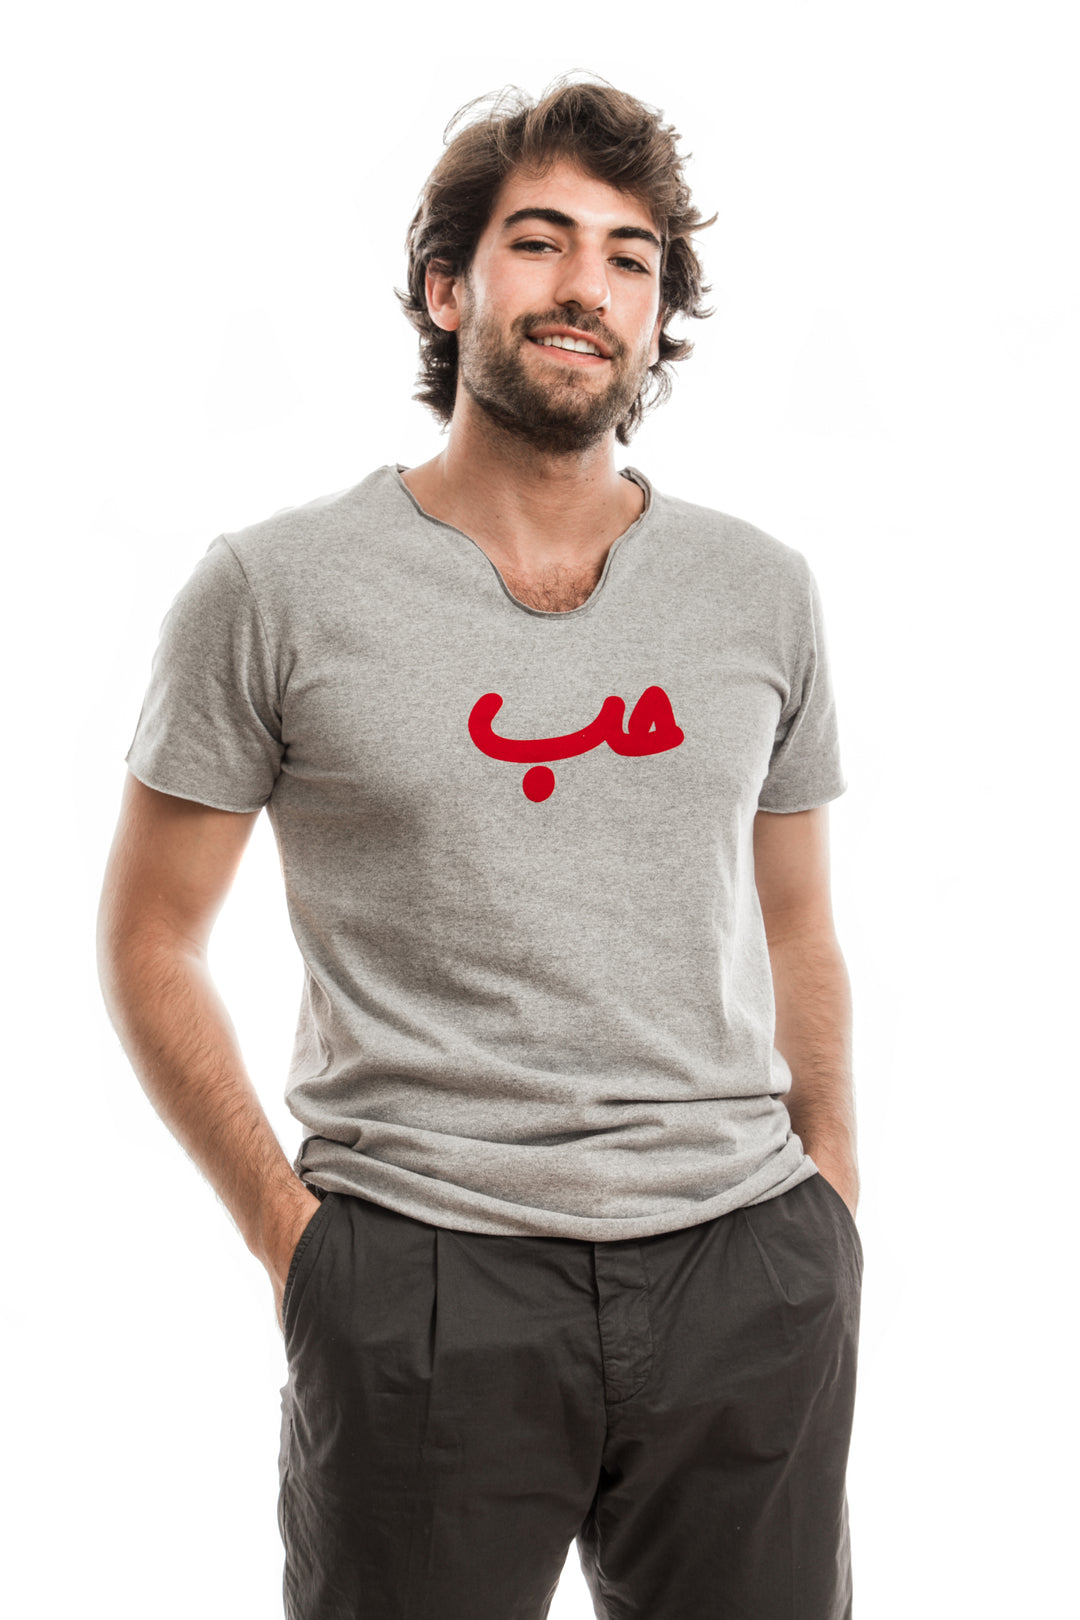 Young adult male wearing grey T-shirt with Hobb written in Arabic حب and printed in red velvet in the center of the T-shirt along with black pants.